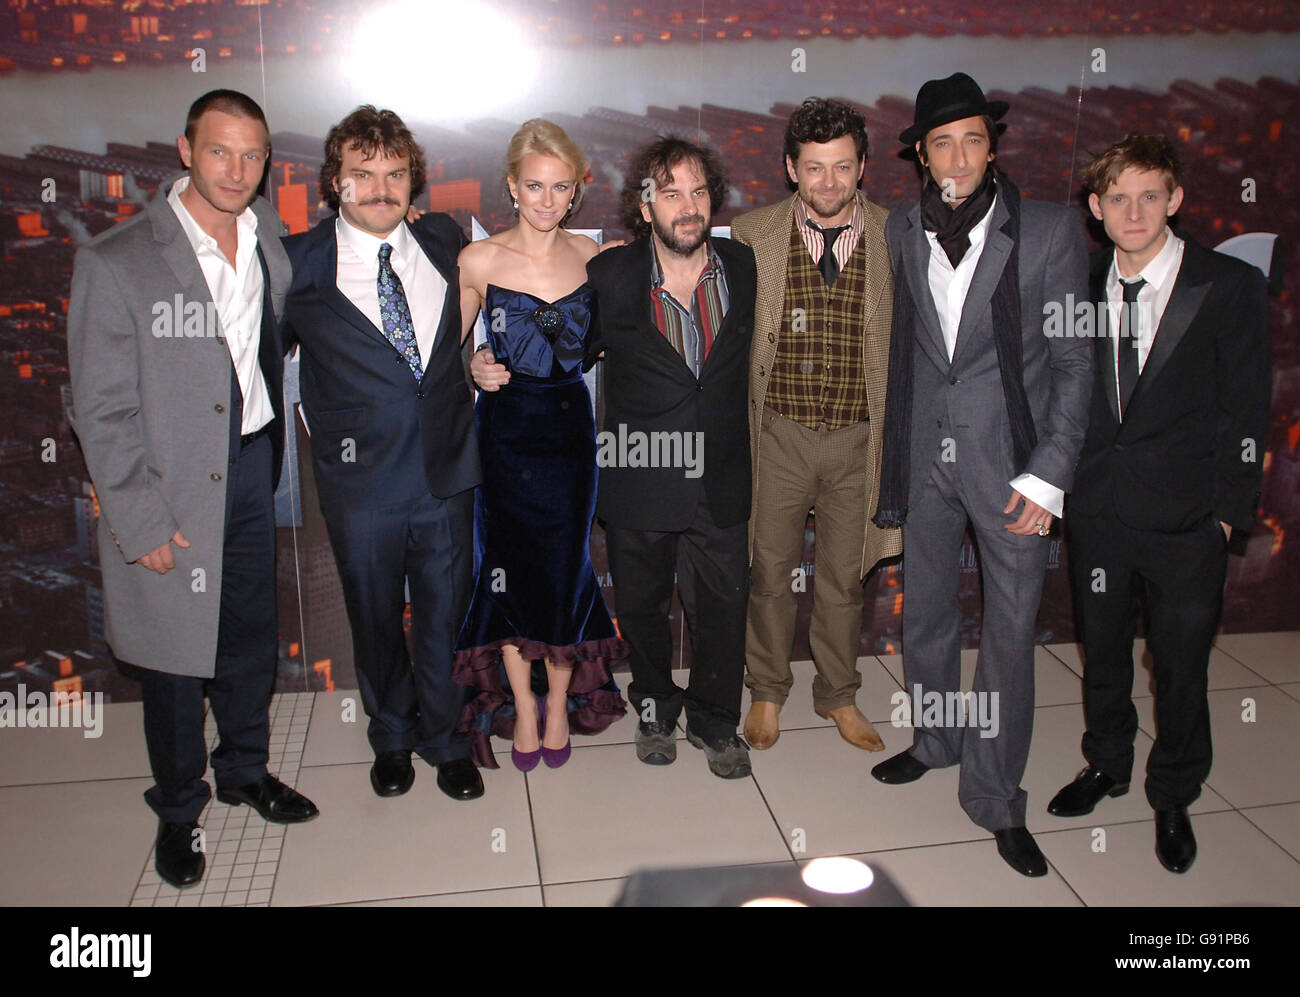 Cast members (left to right) Thomas Kretschmann, Jack Black, Naomi Watts, Peter Jackson (Director), Andy Serkis, Adrien Brody and Jamie Bell arrive for the UK film premiere of 'King Kong', at the Odeon Cinema, Leicester Square, central London, Thursday 8 December 2005. See PA story SHOWBIZ Kong. PRESS ASSOCIATION Photo. Photo credit should read: Ian West/PA Stock Photo